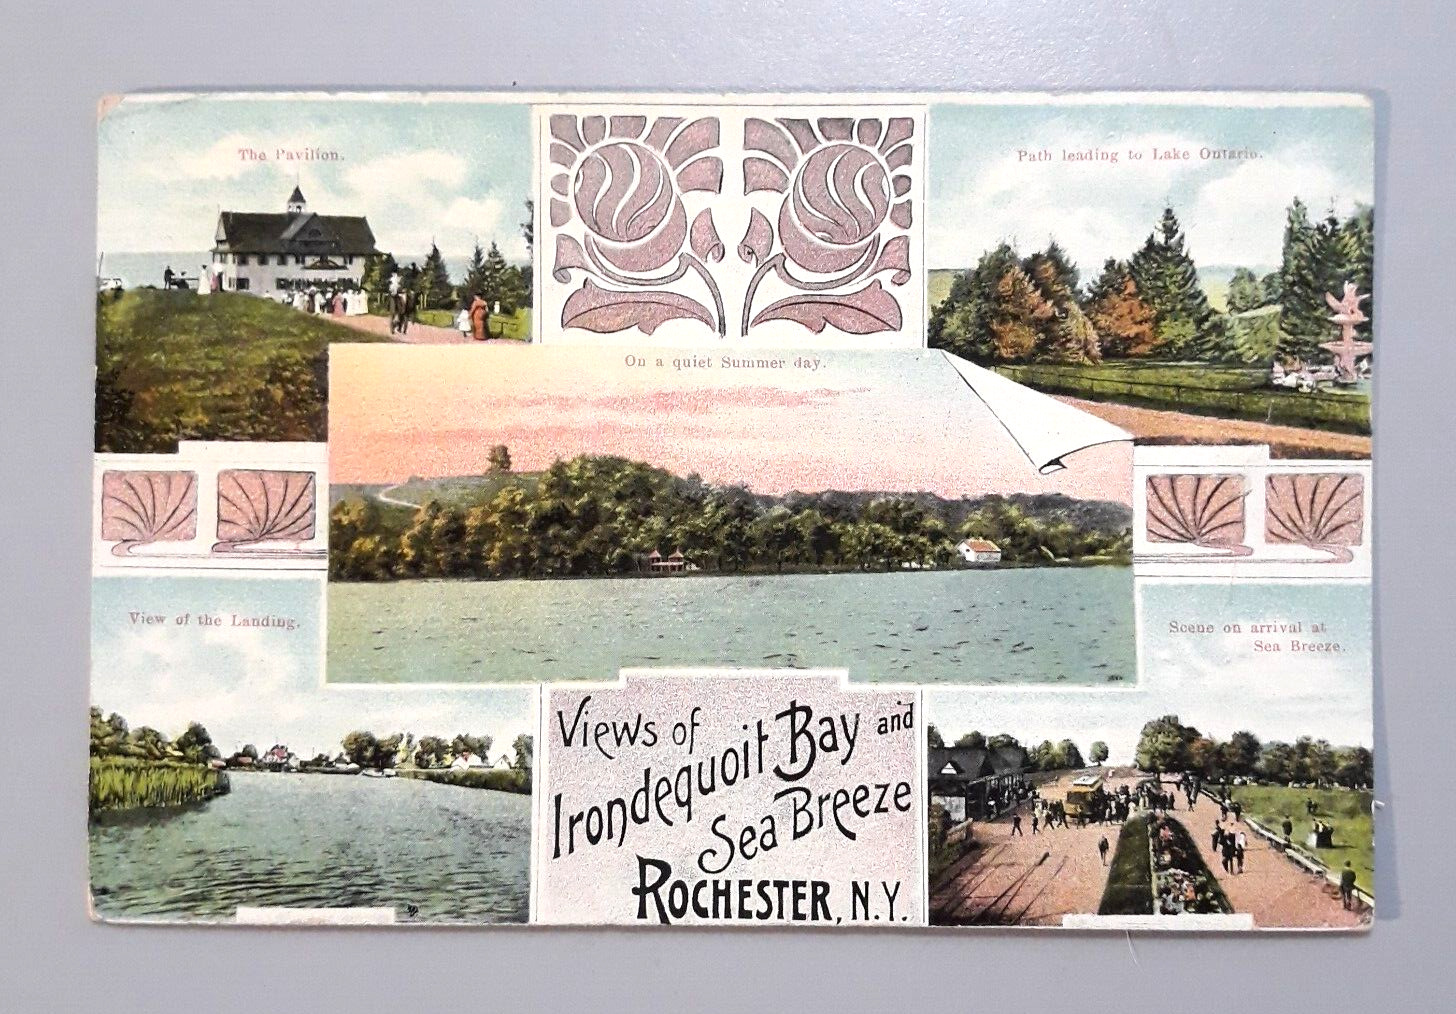 Vintage 1912 Postcard Rochester NY - VIEWS OF IRONDEQUOIT BAY AND SEA BREEZE